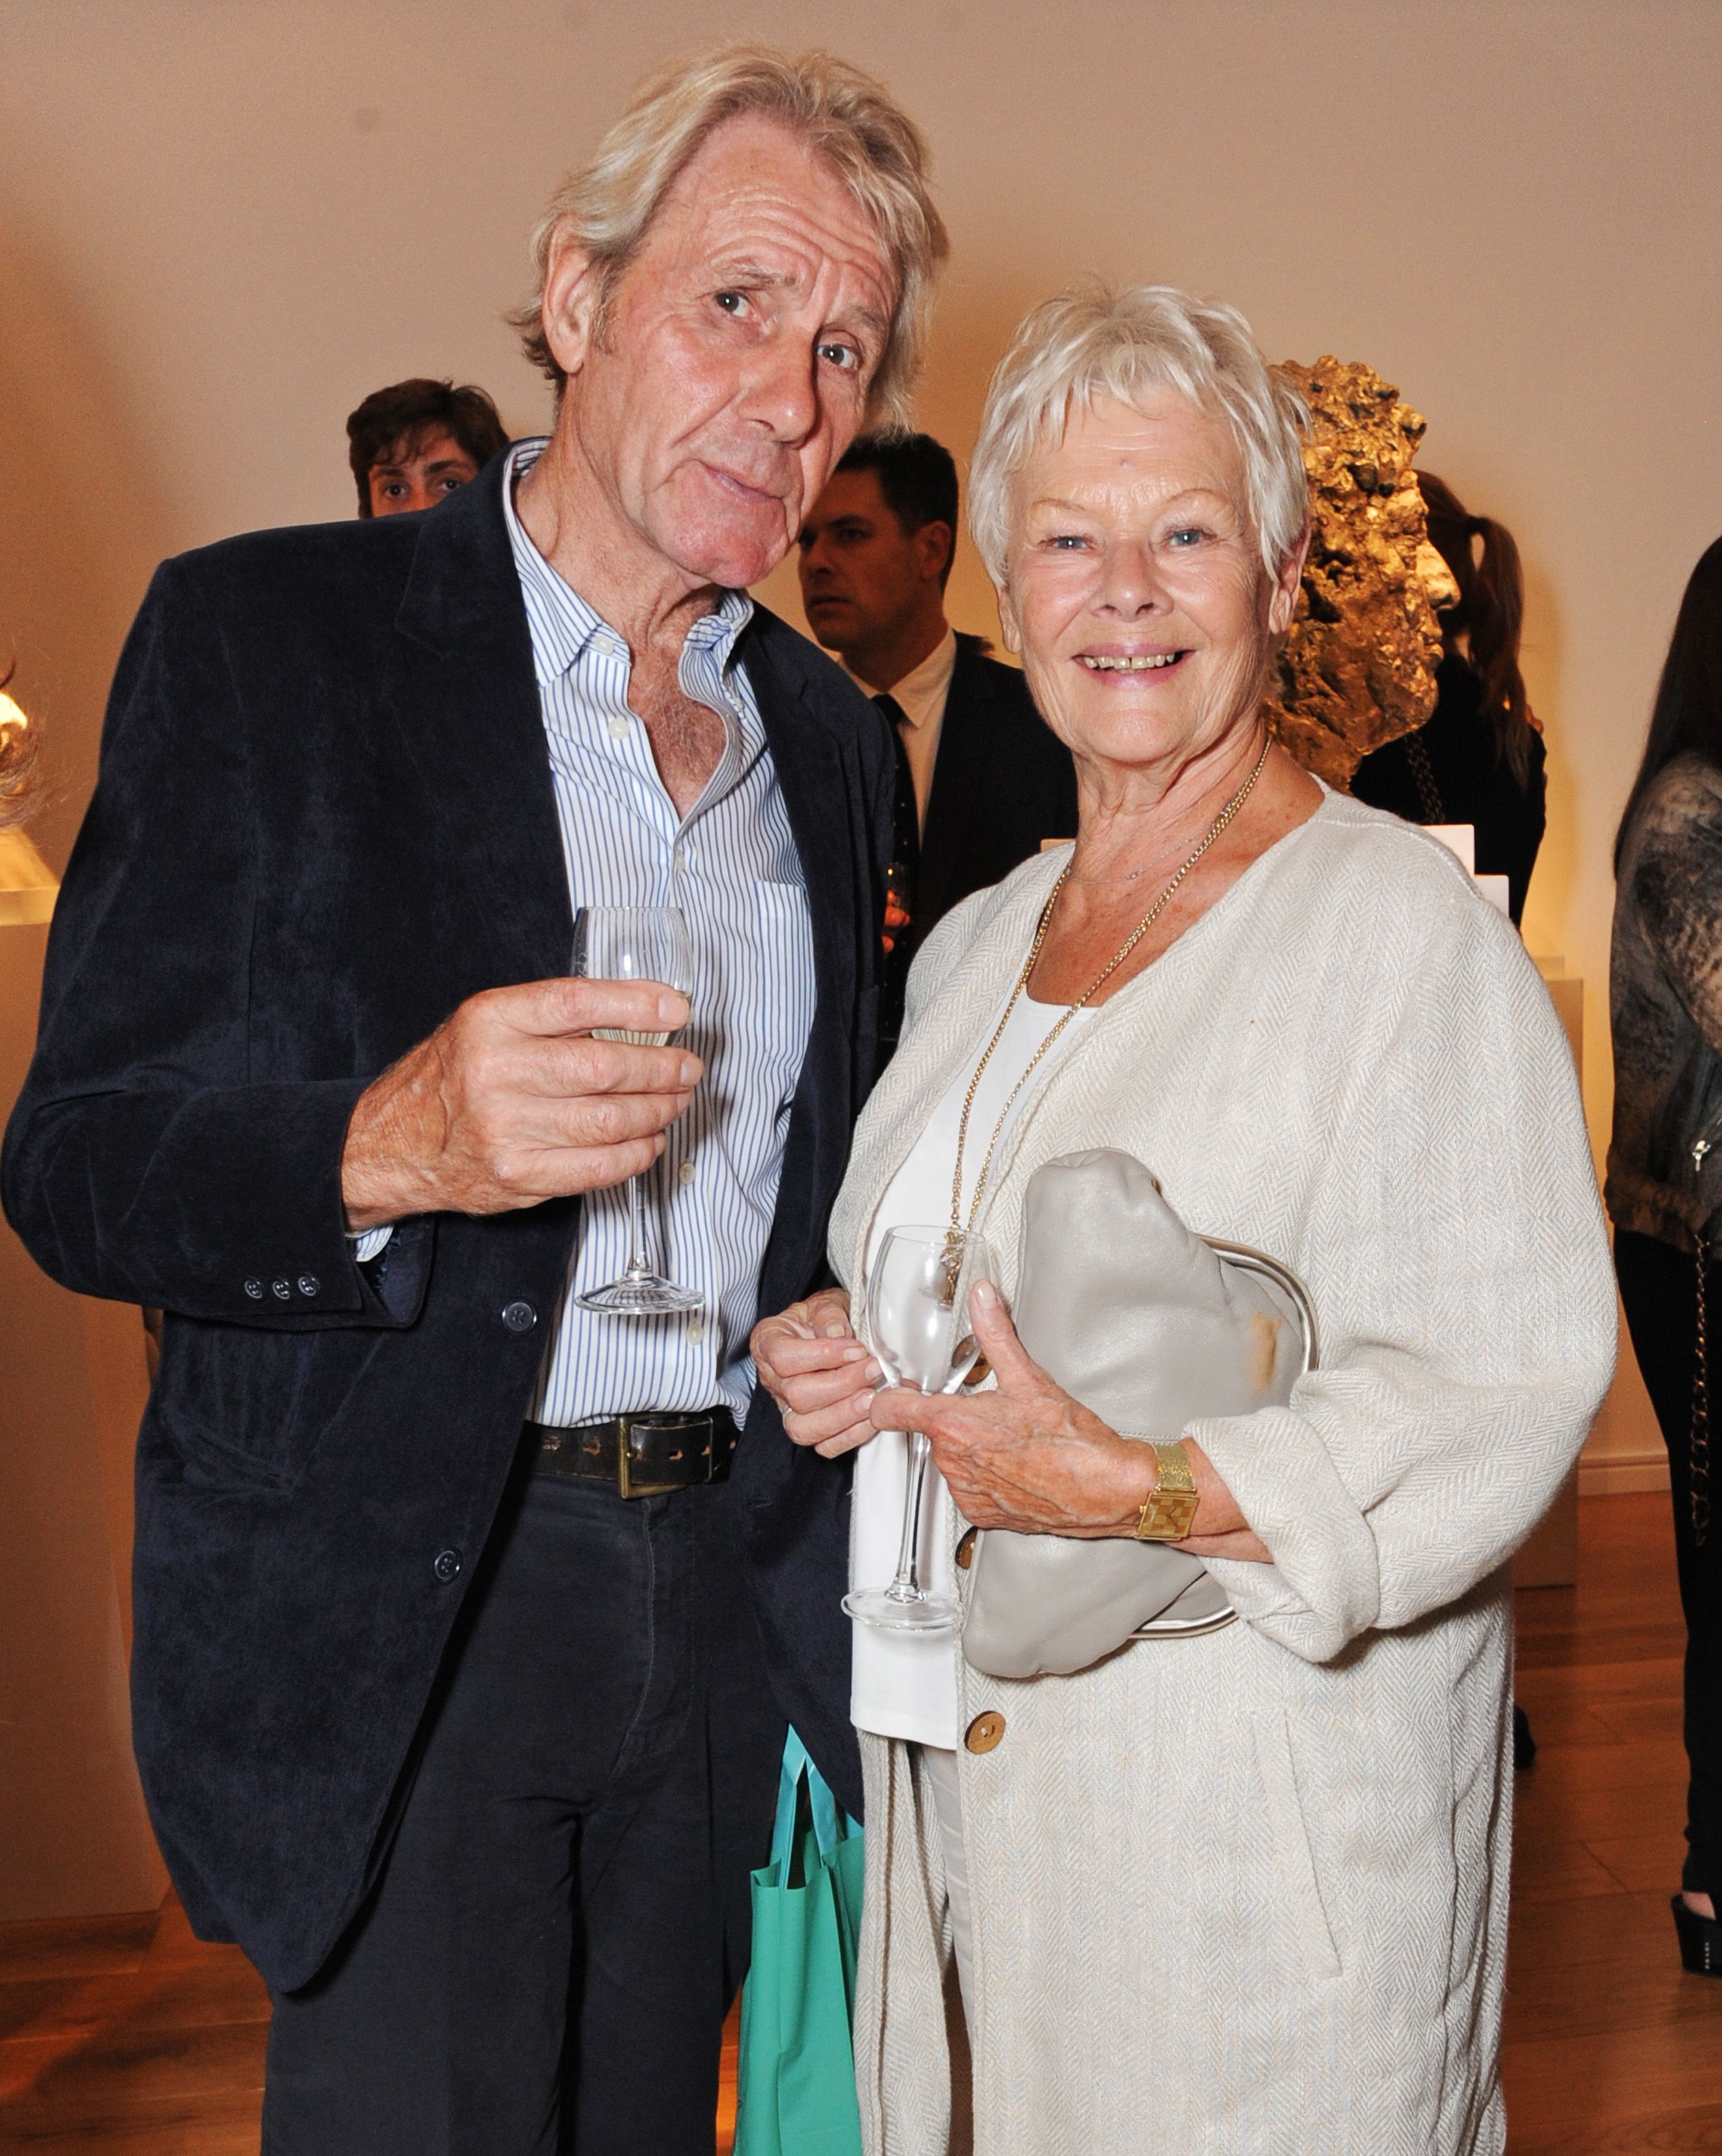 Dame Judi Dench and David Mills at Nicole Farhi's debut exhibition "From The Neck Up" in 2014 in London, England | Source: Getty Images 